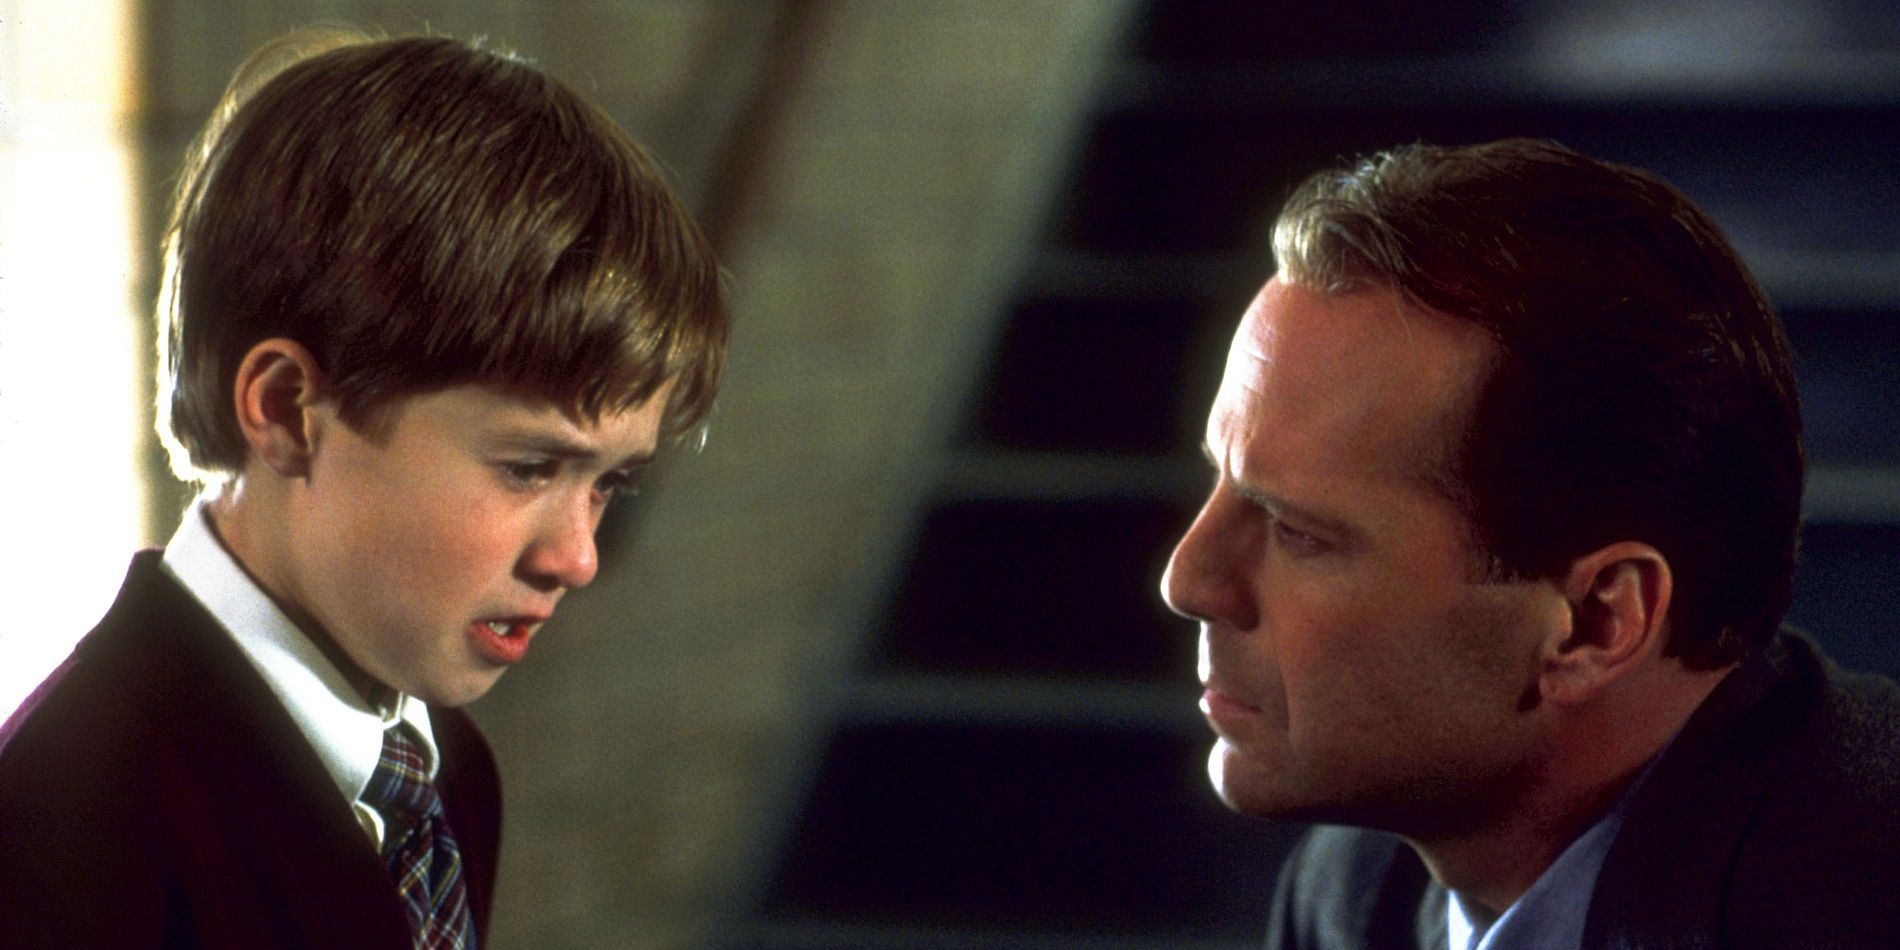 Bruce Willis and Haley Joel Osment as a child in The Sixth Sense